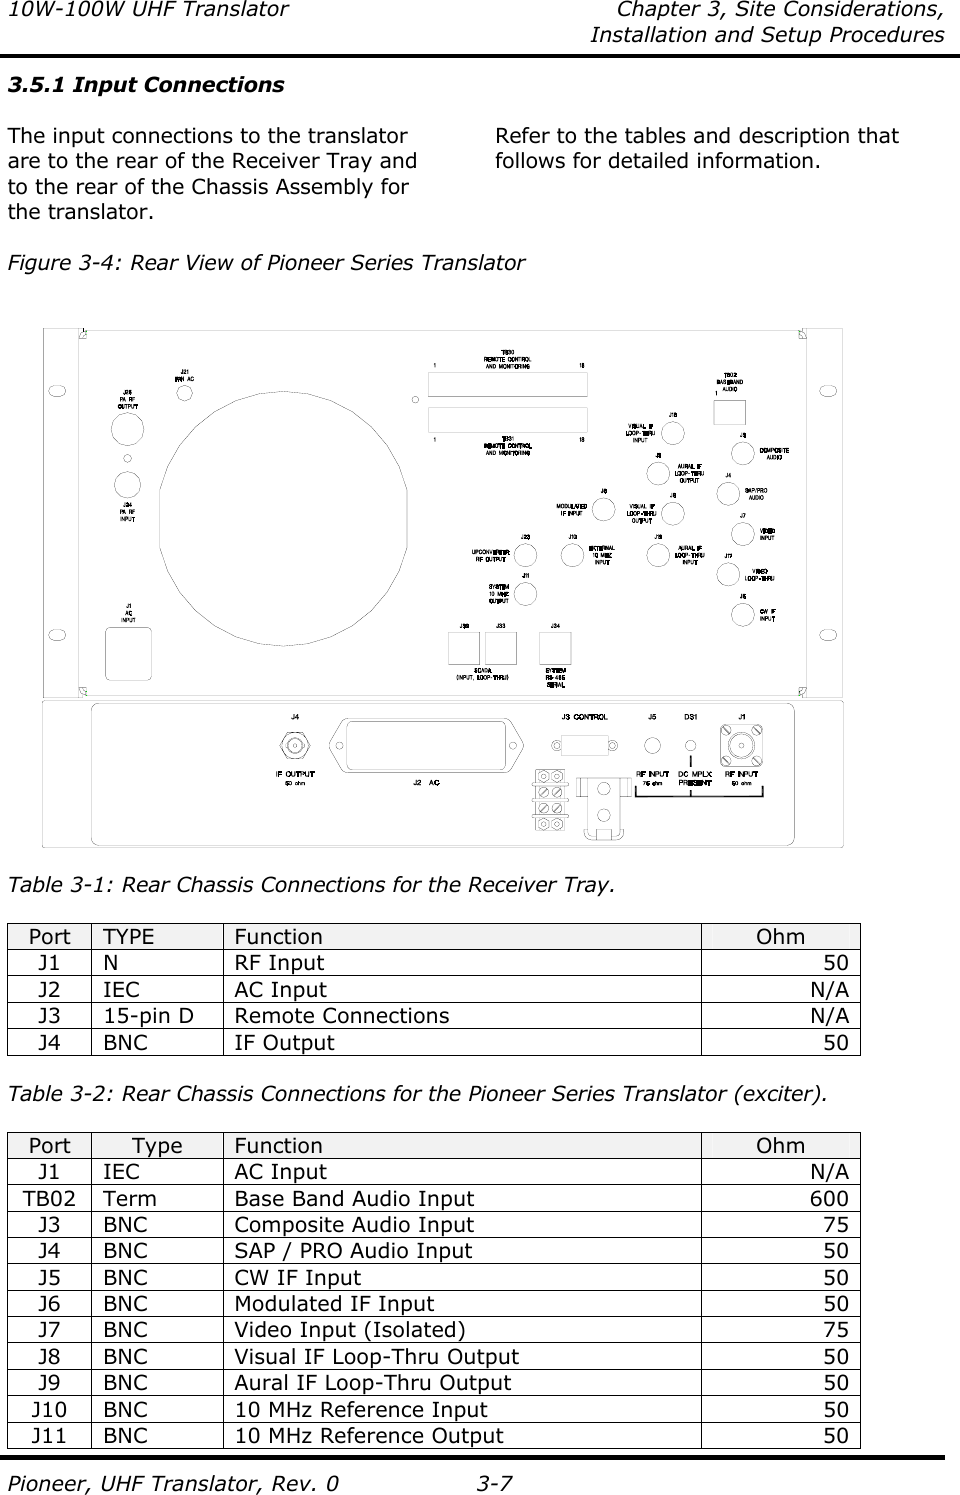 10W-100W UHF Translator  Chapter 3, Site Considerations,    Installation and Setup Procedures  Pioneer, UHF Translator, Rev. 0 3-7 3.5.1 Input Connections  The input connections to the translator are to the rear of the Receiver Tray and to the rear of the Chassis Assembly for the translator.   Refer to the tables and description that follows for detailed information.   Figure 3-4: Rear View of Pioneer Series Translator                         Table 3-1: Rear Chassis Connections for the Receiver Tray.  Port  TYPE  Function  Ohm J1 N  RF Input  50 J2 IEC  AC Input  N/A J3  15-pin D  Remote Connections  N/A J4 BNC  IF Output  50  Table 3-2: Rear Chassis Connections for the Pioneer Series Translator (exciter).  Port  Type  Function  Ohm J1 IEC  AC Input  N/A TB02  Term  Base Band Audio Input  600  J3  BNC  Composite Audio Input  75 J4  BNC  SAP / PRO Audio Input  50 J5  BNC  CW IF Input  50 J6  BNC  Modulated IF Input  50 J7  BNC  Video Input (Isolated)  75 J8  BNC  Visual IF Loop-Thru Output  50 J9  BNC  Aural IF Loop-Thru Output  50 J10  BNC  10 MHz Reference Input  50 J11  BNC  10 MHz Reference Output  50 